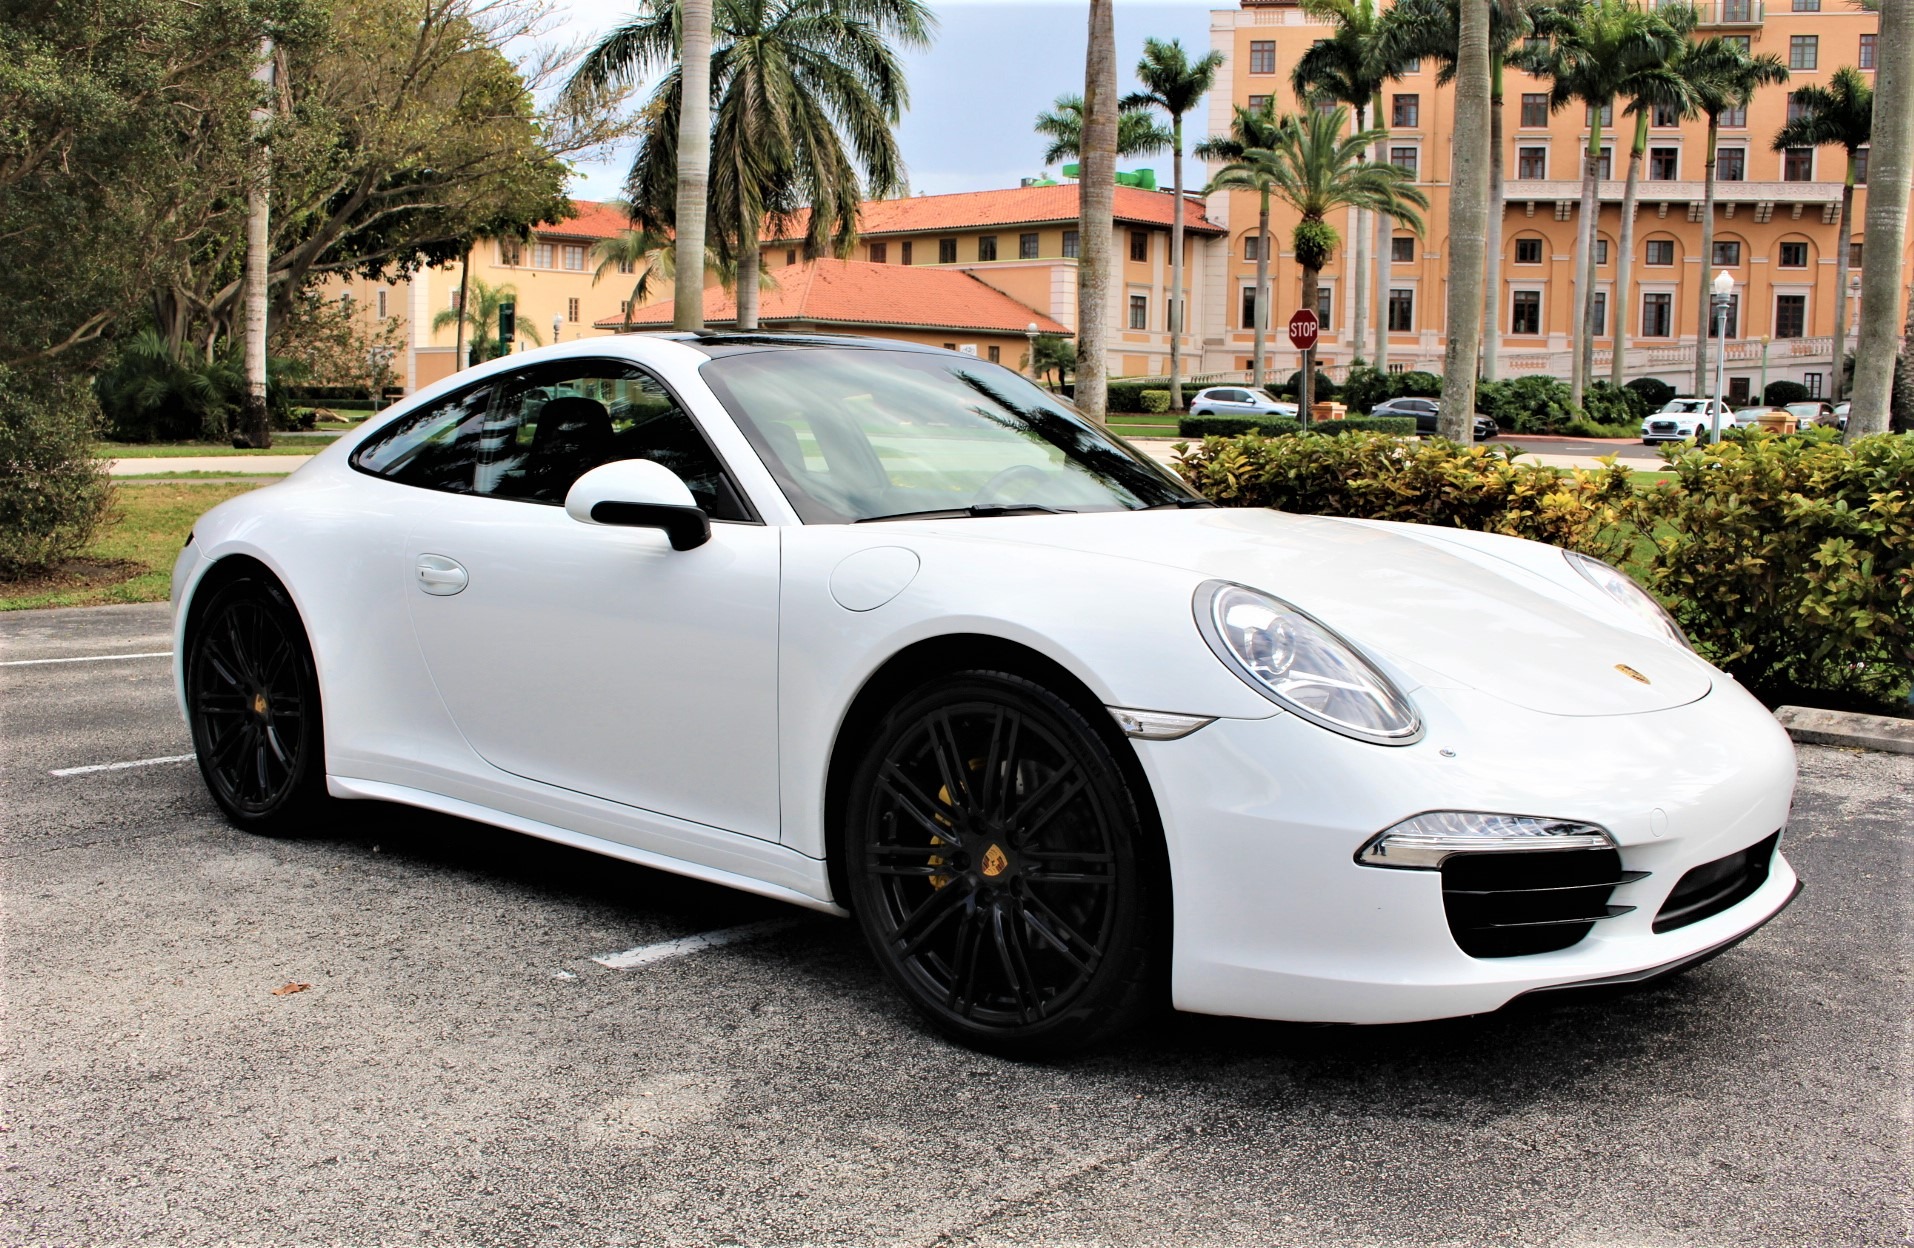 Used 2013 Porsche 911 Carrera 4 for sale Sold at The Gables Sports Cars in Miami FL 33146 3